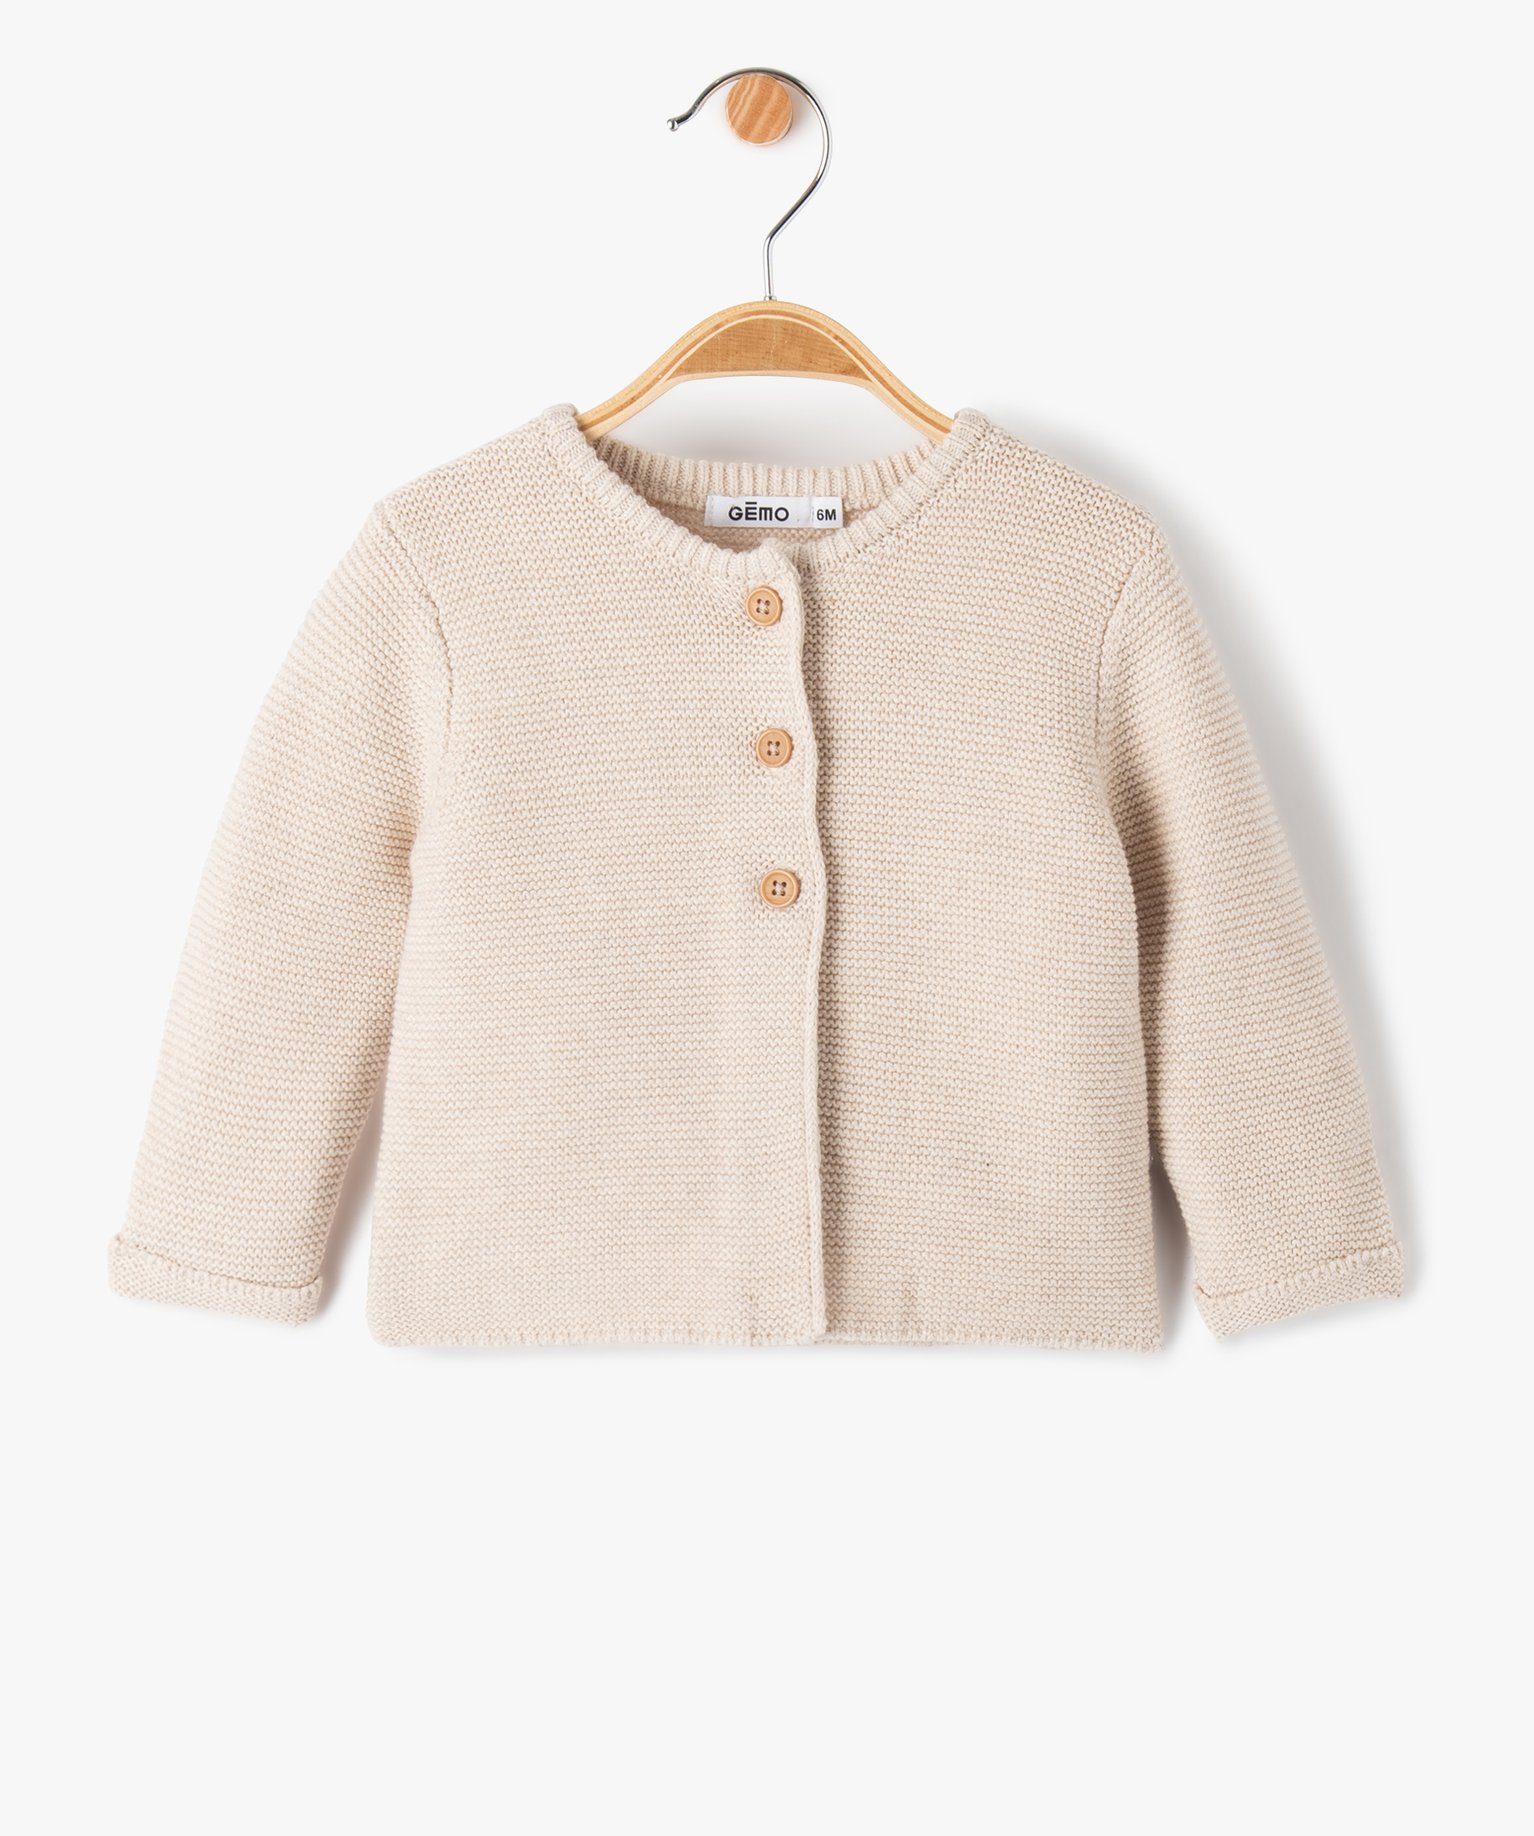 gilet bebe a col rond en maille tricotee beige